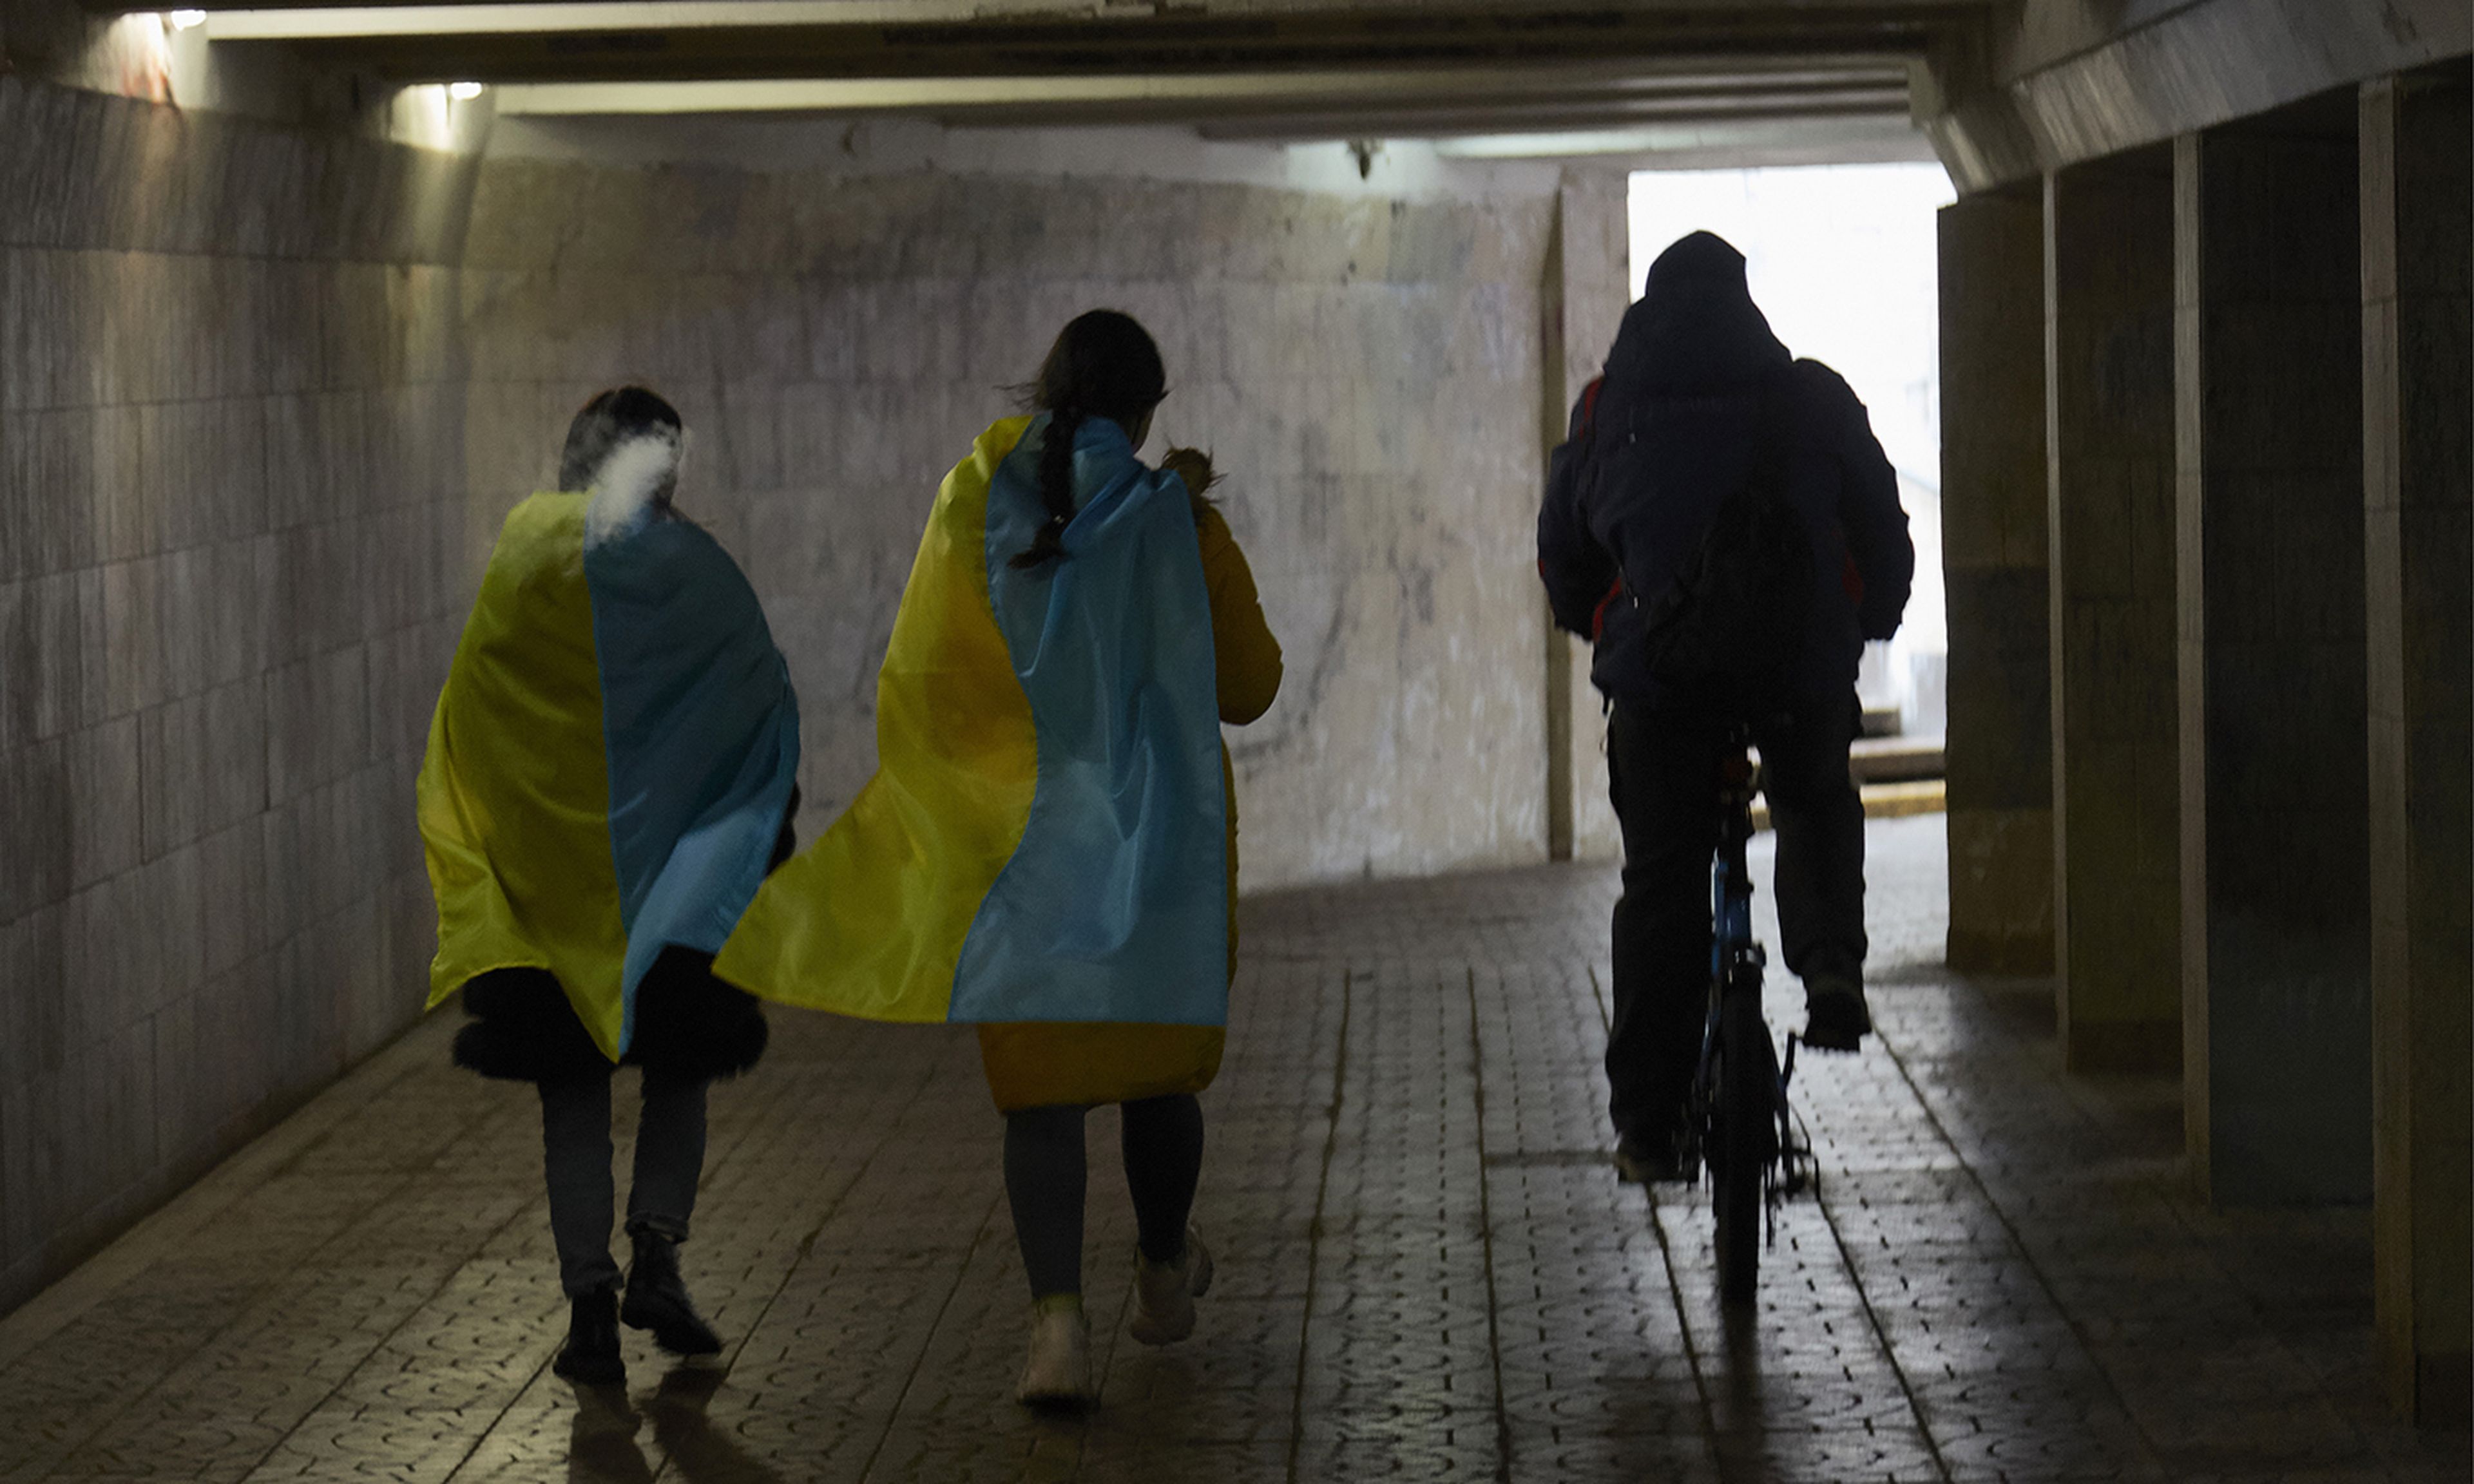 New malware targeting Ukrainian organizations, dubbed HermeticWiper, appears to obliterate a system, according to SentinelLabs. Pictured: Local residents wearing Ukrainian flags walk through an underpass on Feb. 24, 2022, in Kyiv, Ukraine. (Photo by Pierre Crom/Getty Images)